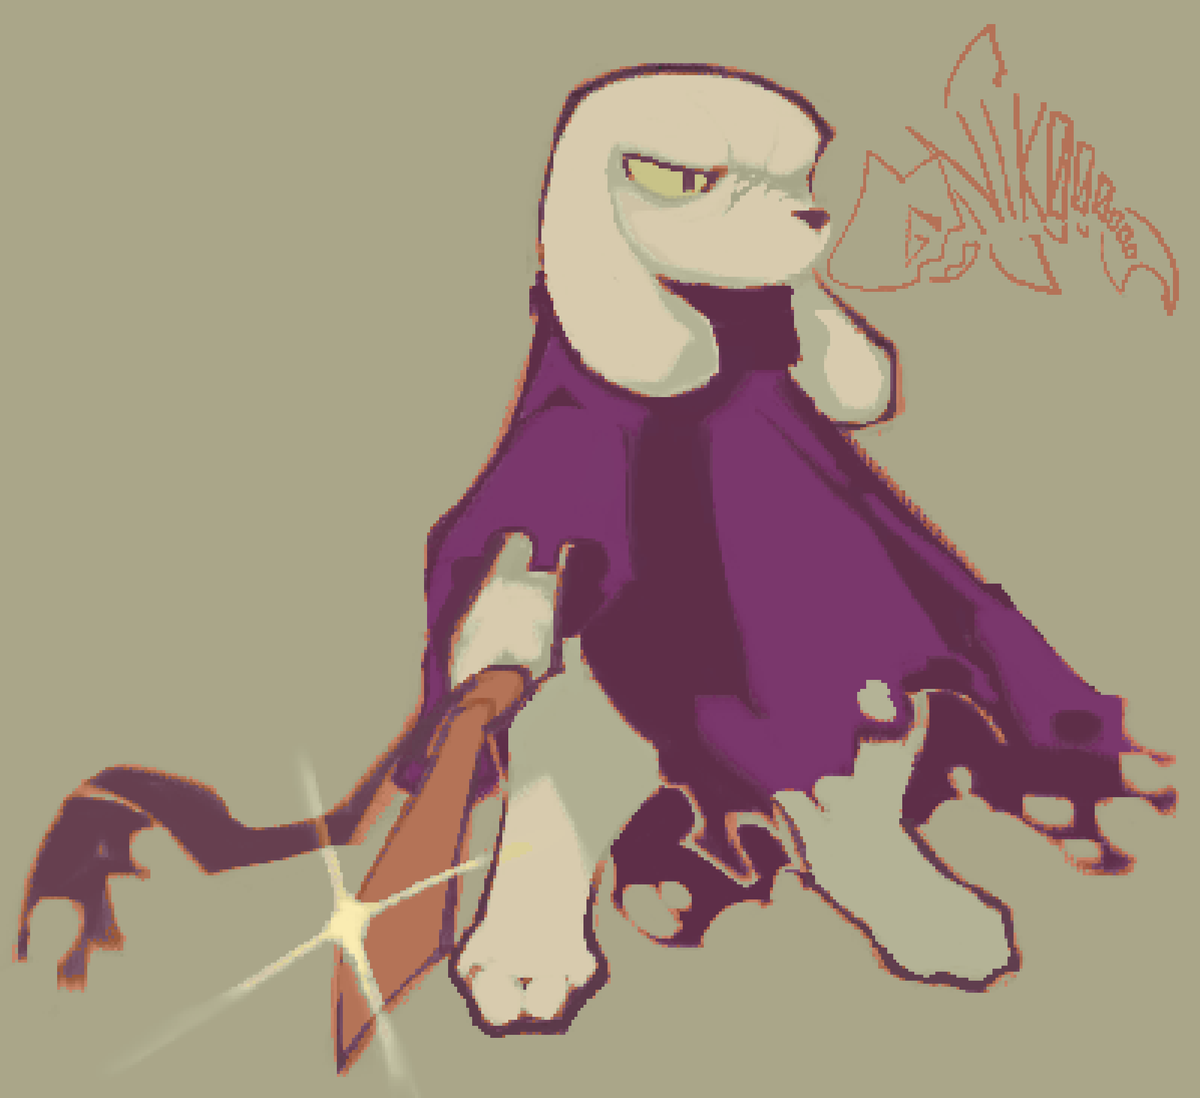 king !!!
from cave story